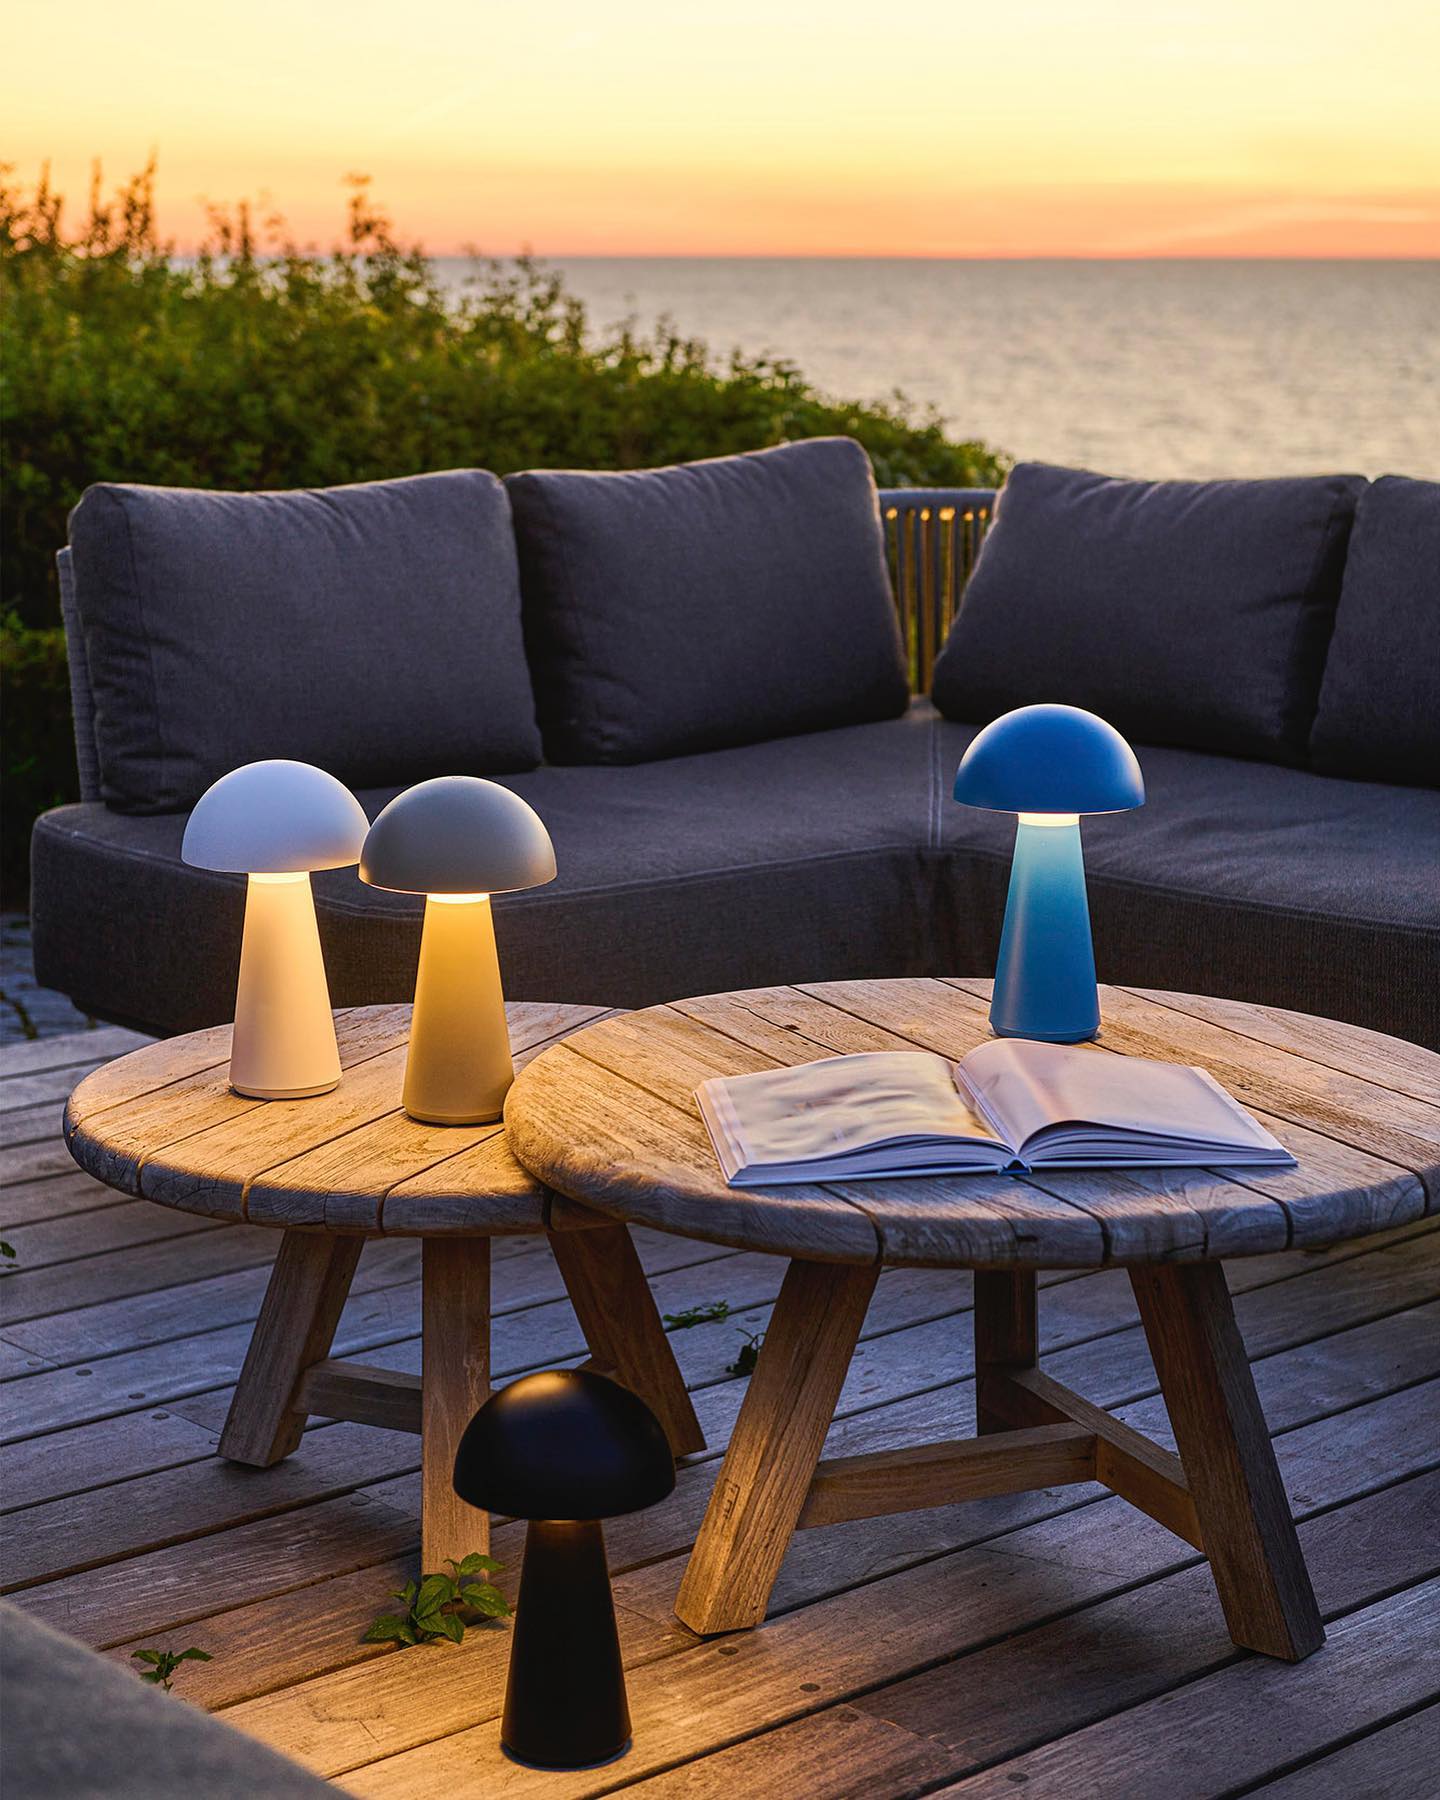 SAM from SIRIUS in Denmark has arrived this season in the shape of a new lamp.
SAM is water-resistant, wireless and has three light intensity settings.
For indoor and outdoor use. 
.
.
#sirius #siriusled #leds #lamp #indoorlighting #outdoorlighting #portablelighting #lamps #wireless #wirelesslamp #waterresistant